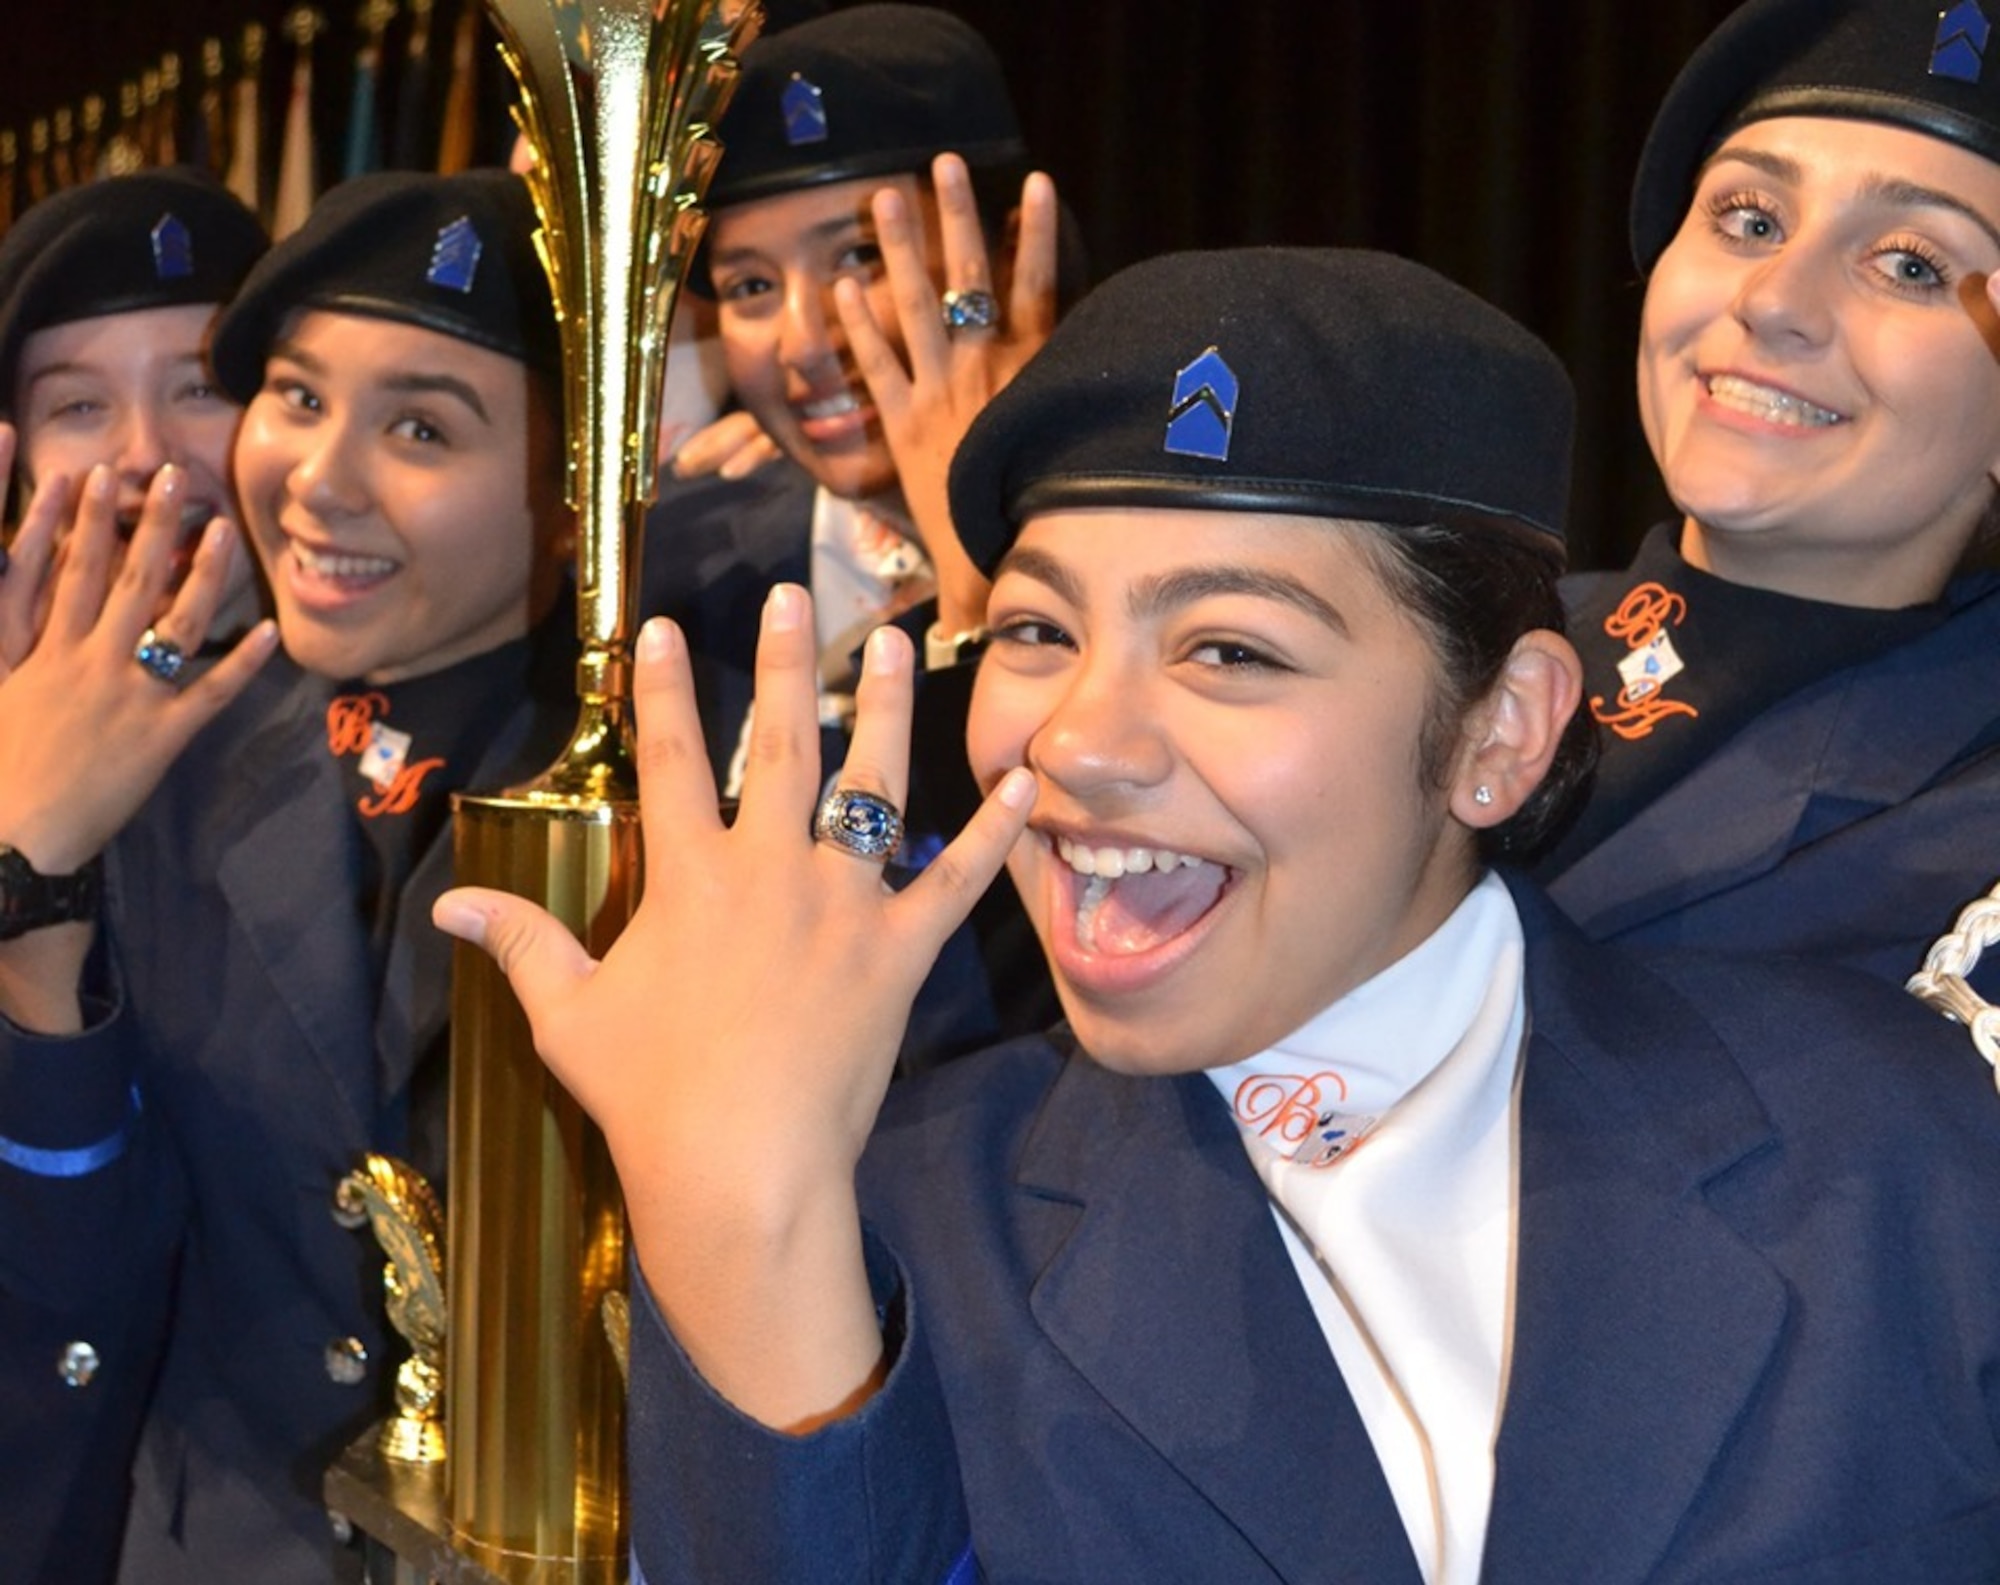 Air Force Junior Reserve Officer Training Corps cadets from Louis D. Brandeis High School, San Antonio, Texas, showcase the rings they received from the 2018 National High School Drill Team Competition following their 2019 victory in the same event May 3-5 2019, at Daytona Beach, Fla. The cadets were the first team in 35 years to accomplish consecutive victories in the competition.